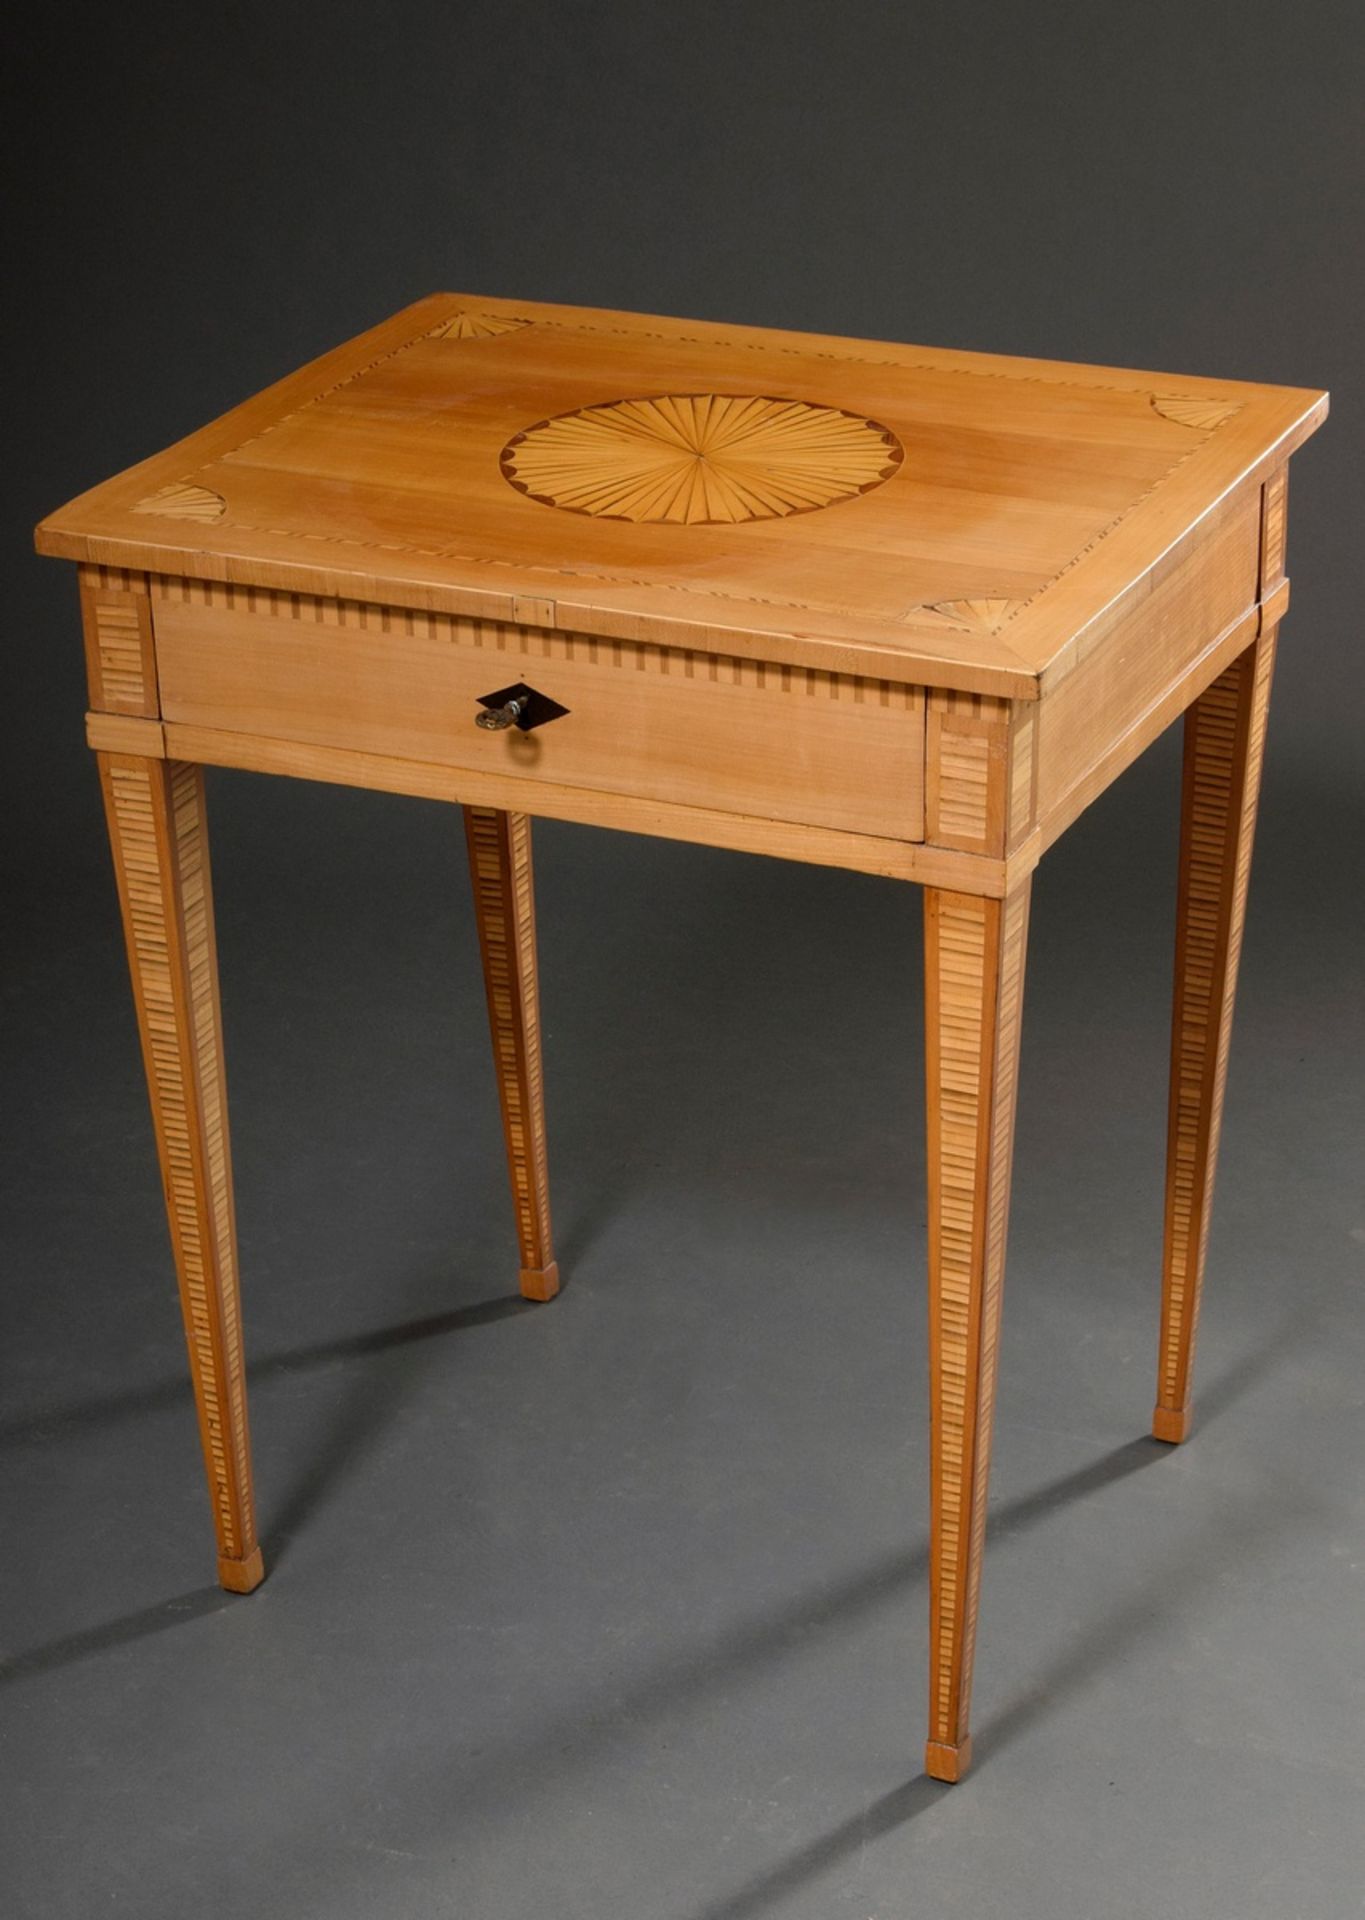 Side table with inlays, fruitwoods, around 1800, 77x65x53cm, strongly paled - Image 2 of 9